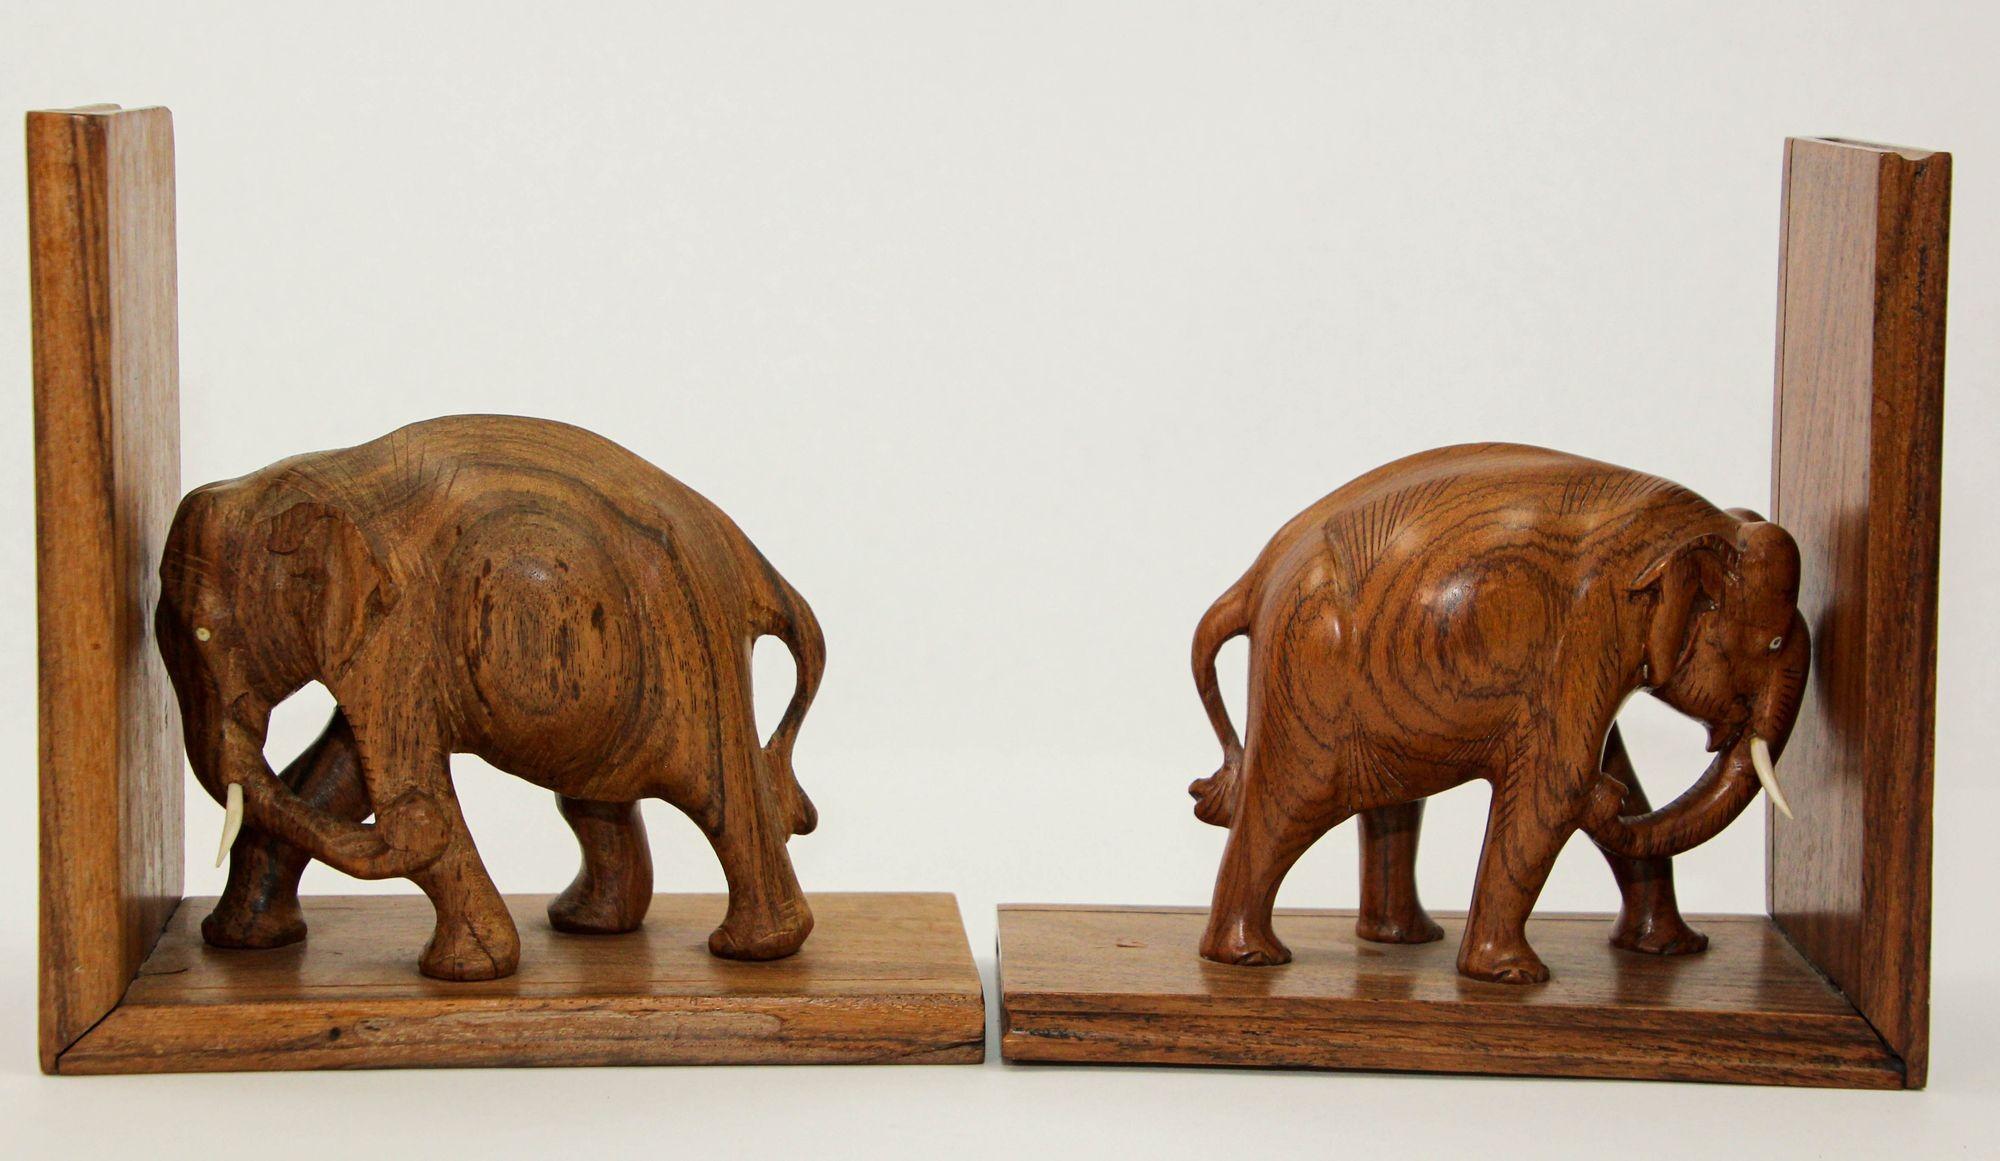 Art Deco Wooden Asian Elephant Bookends Hand Carved Rosewood India 1940s For Sale 3